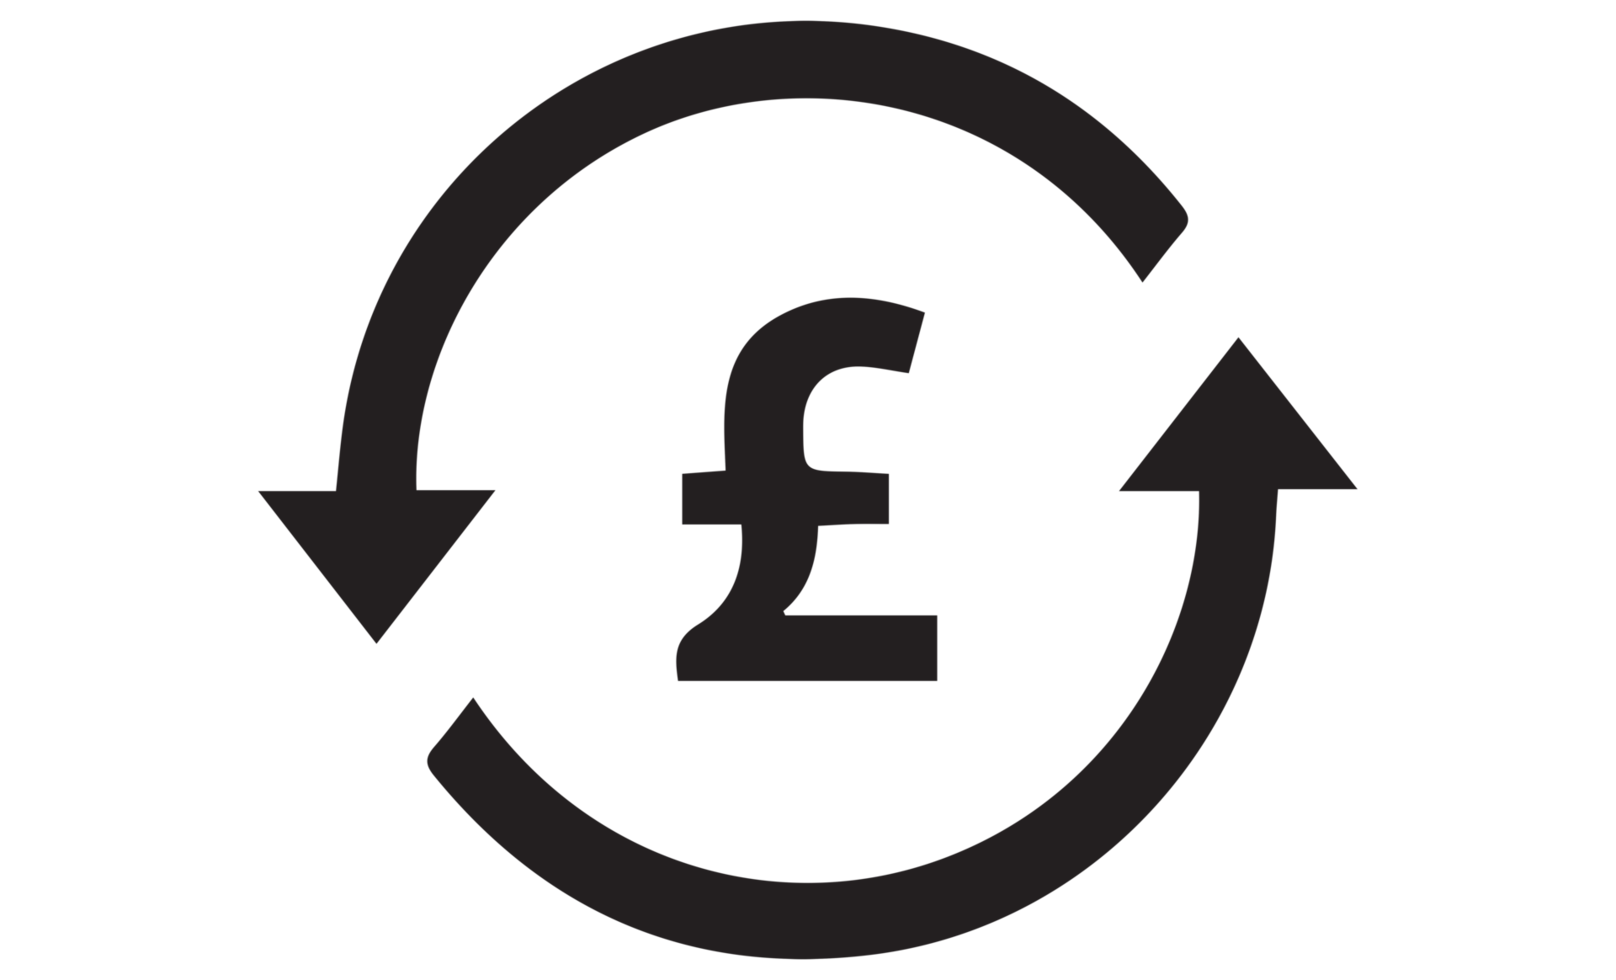 Coin icon. Pound coin. Money symbol. Bank payment symbol. Pound sign. Finance symbol. on transparent background png